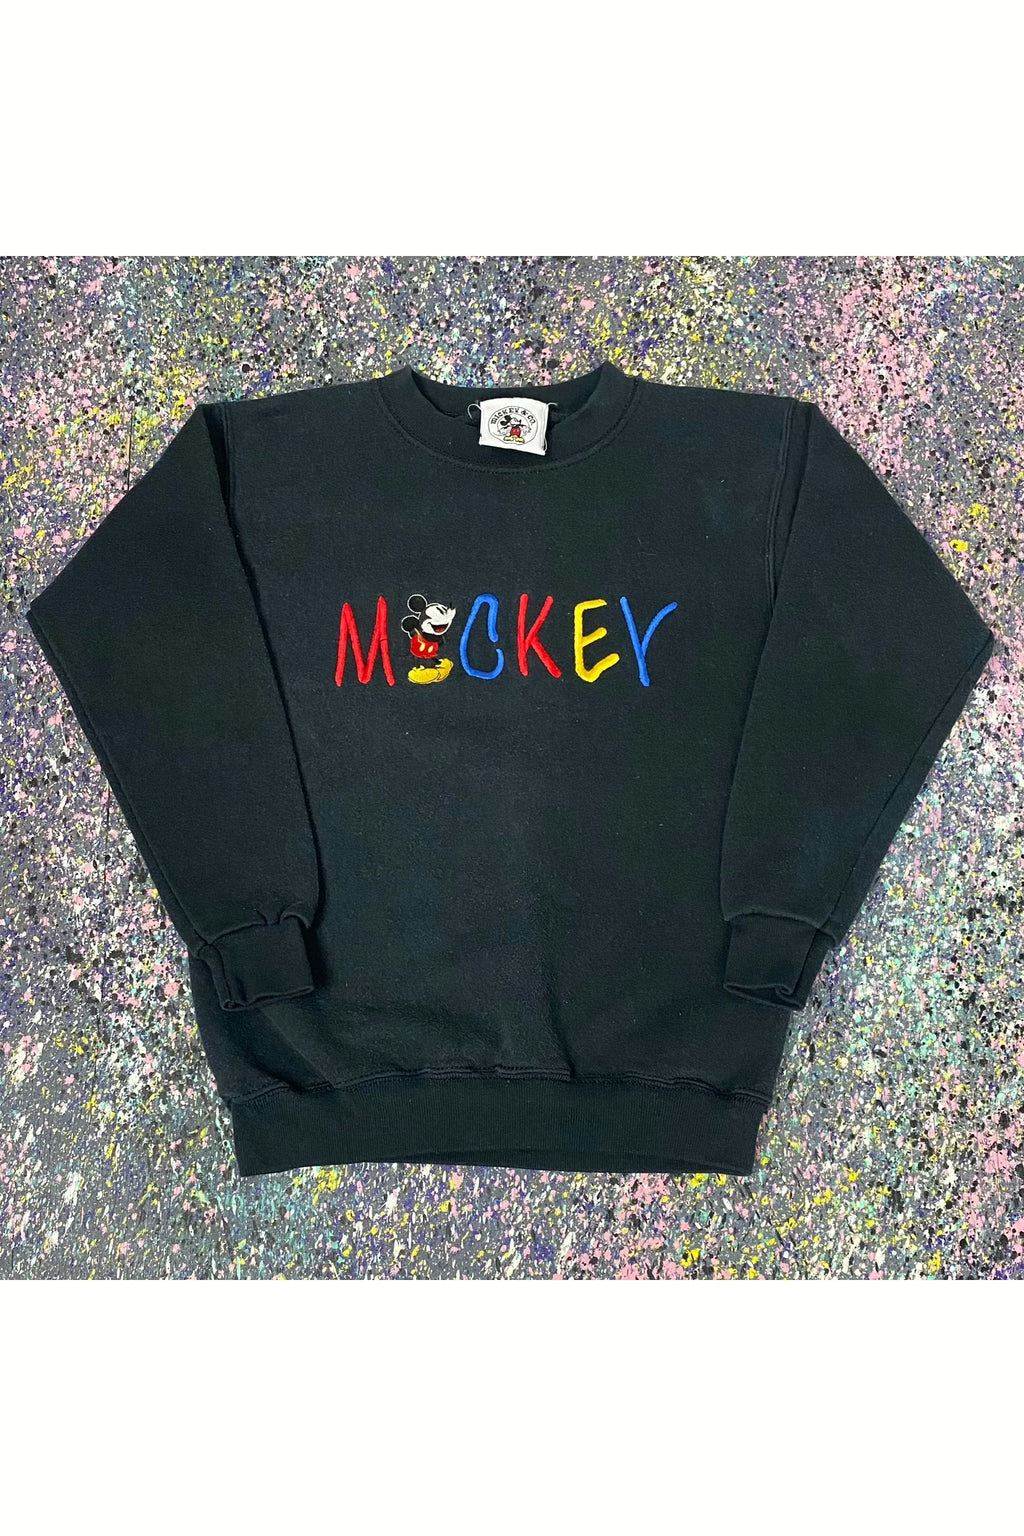 Vintage Mickey & Co. Embroidered Mickey Youth Crewneck- YTH M (8-10)